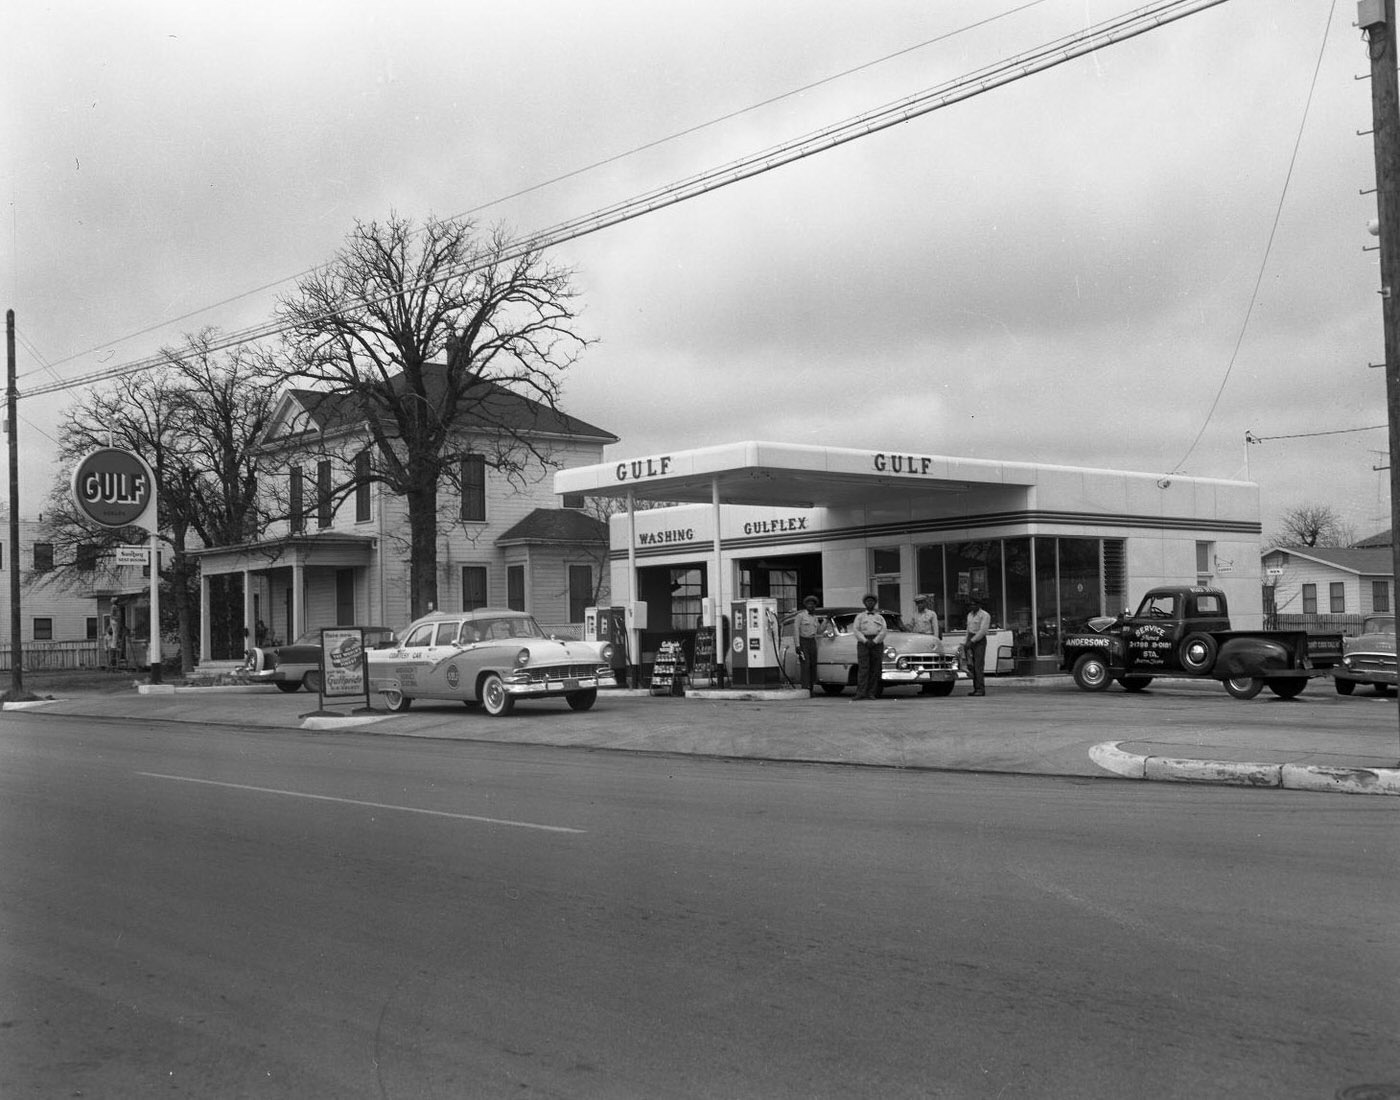 Crew at Anderson's Gulf Service Station in Austin, 1956.